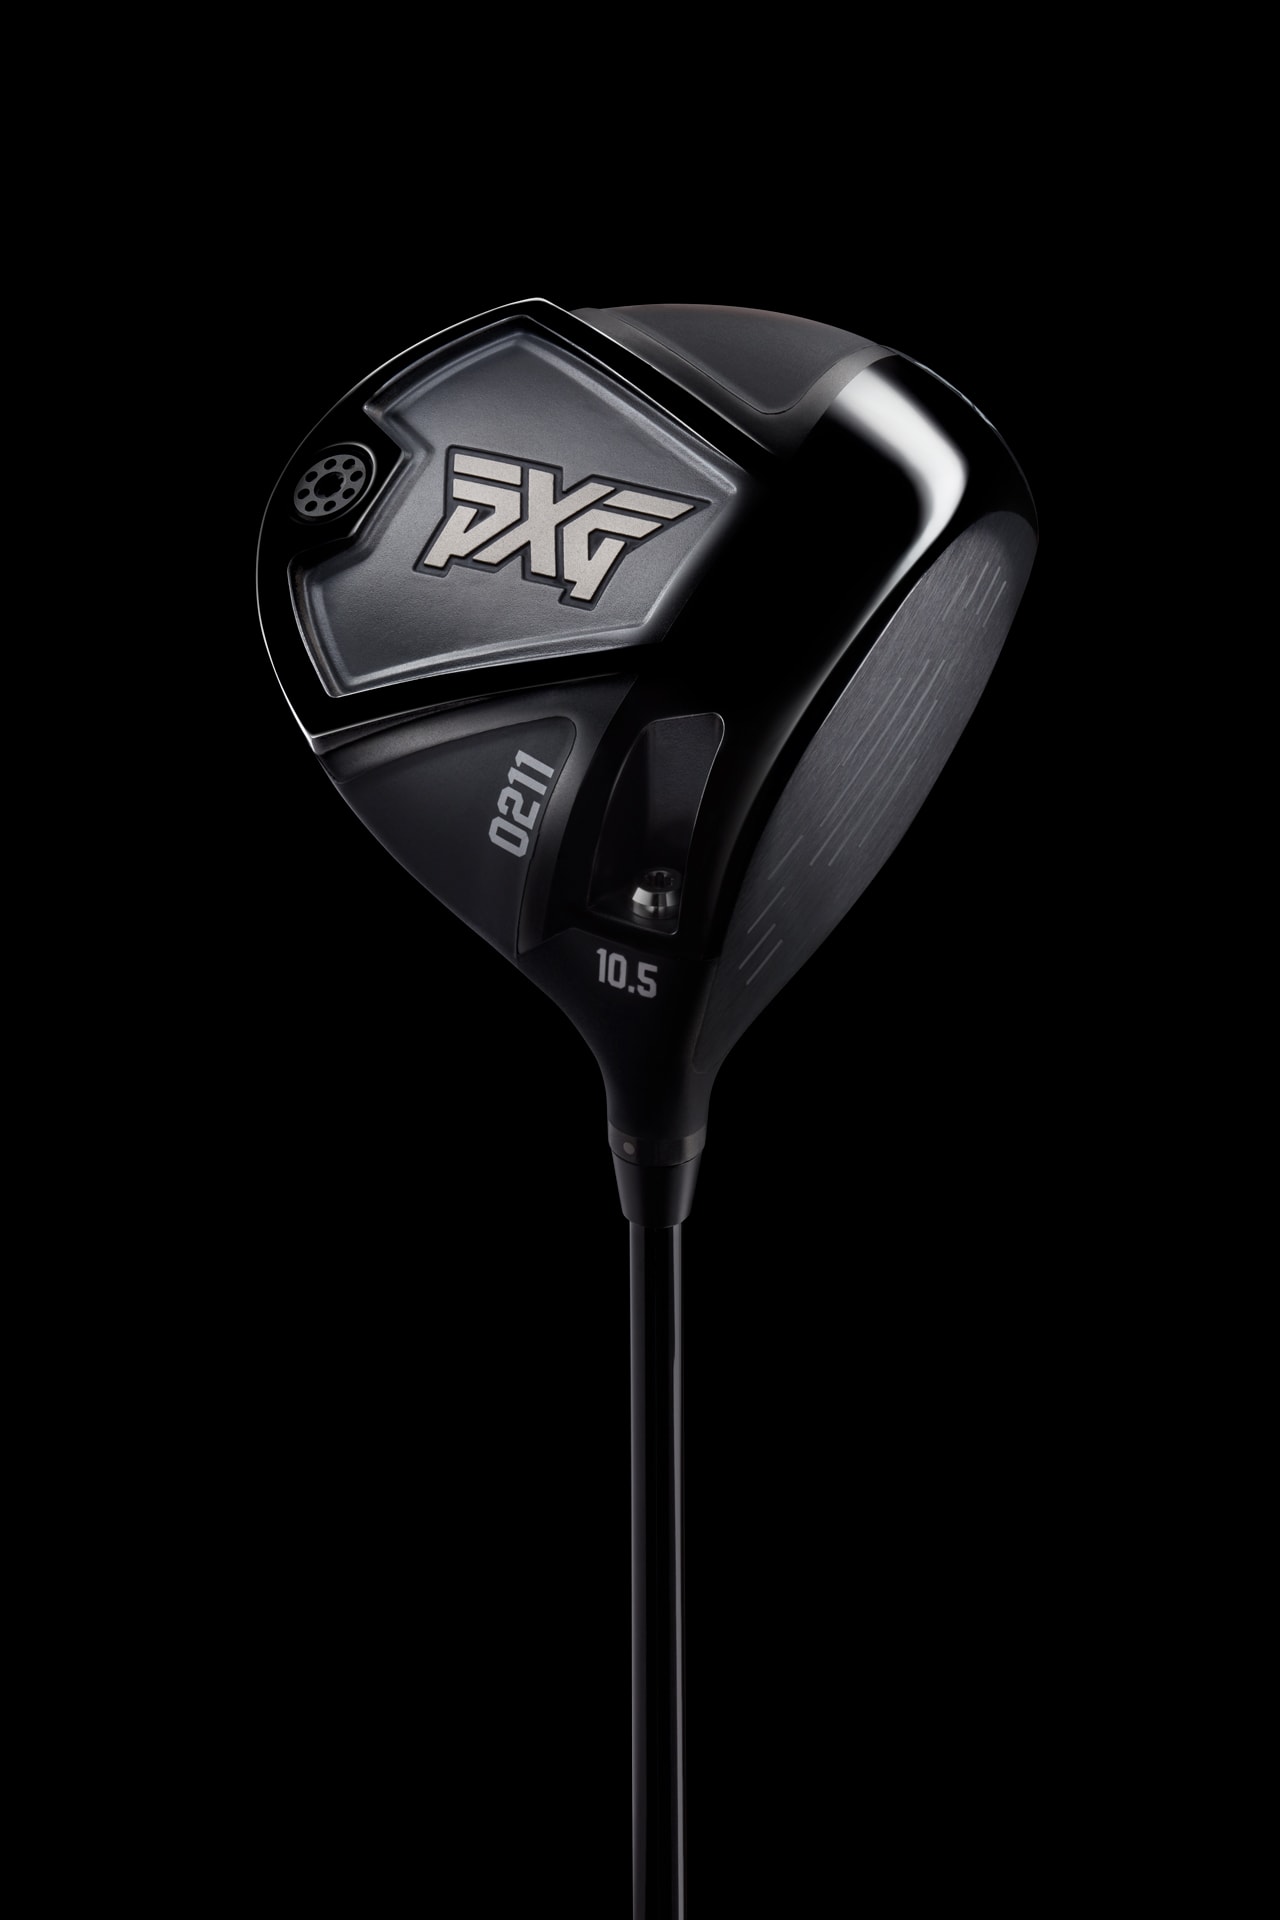 PXG golf clubs: What golfers need to know about this equipment brand from  Bob Parsons